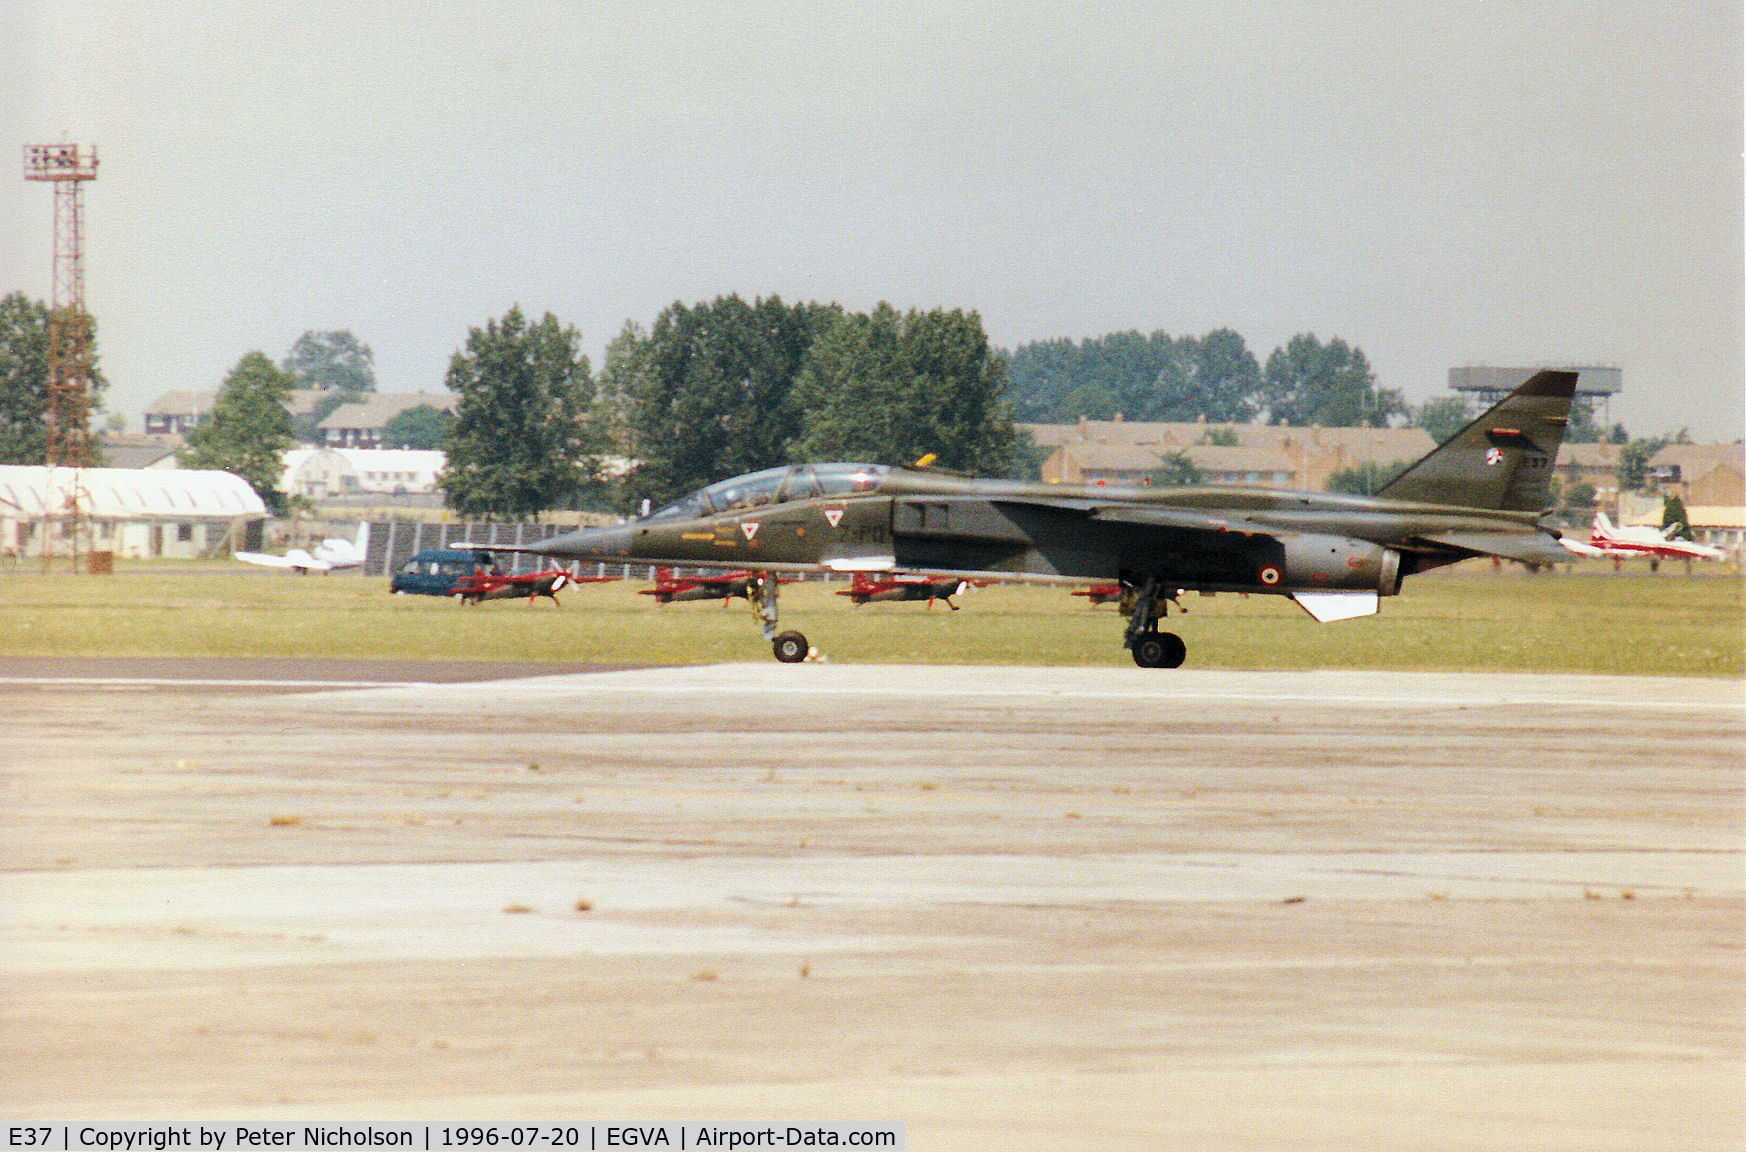 E37, Sepecat Jaguar E C/N E37, Jaguar E of the French Air Force's EC 02.00 preparing for take-off at the 1996 Royal Intnl Air Tattoo at RAF Fairford.